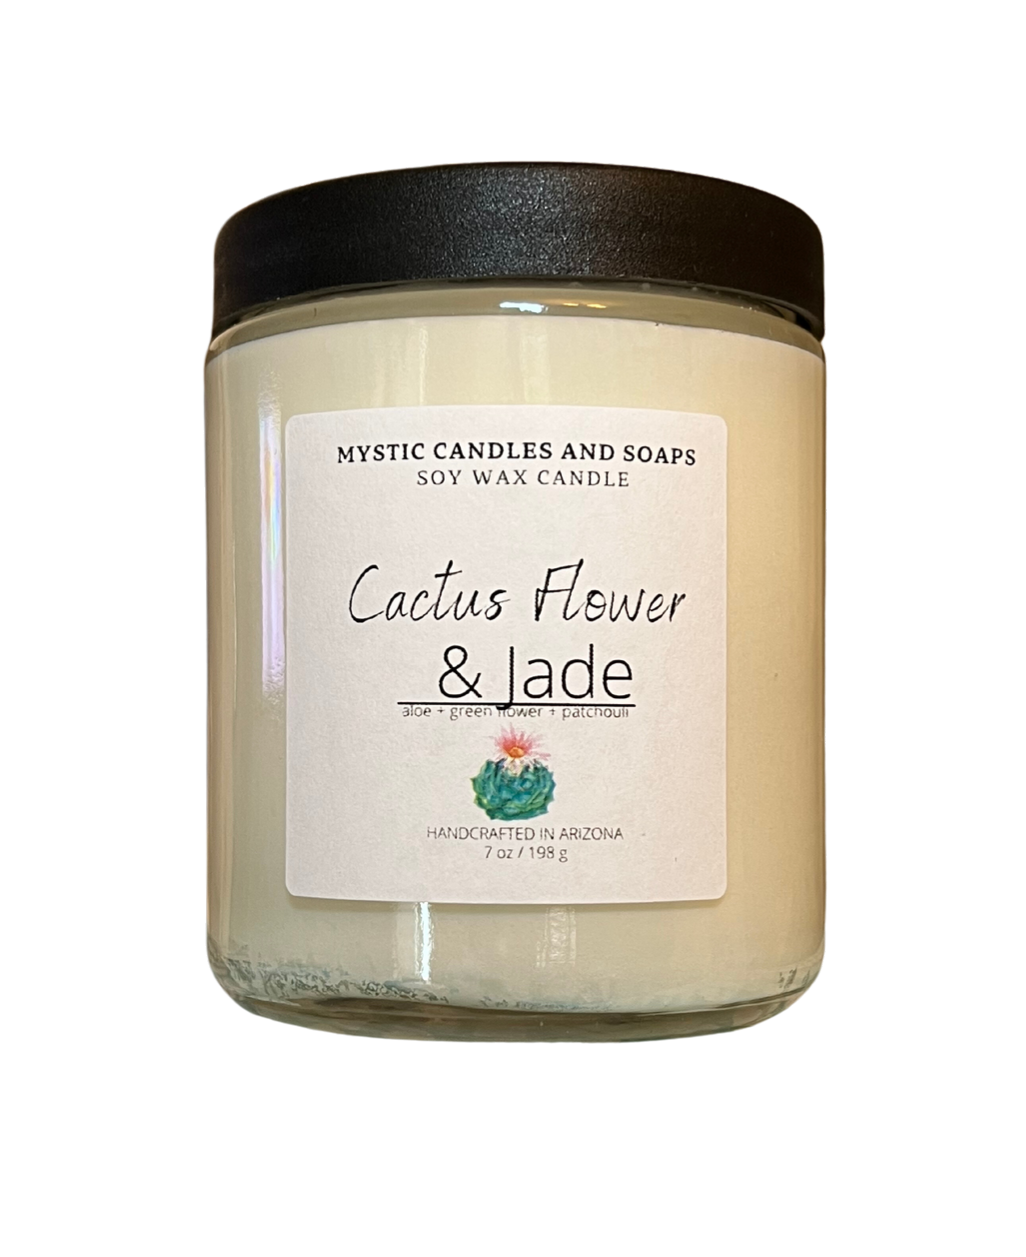 Cactus Flower & Jade Candle - Mystic Candles and Soaps LLC